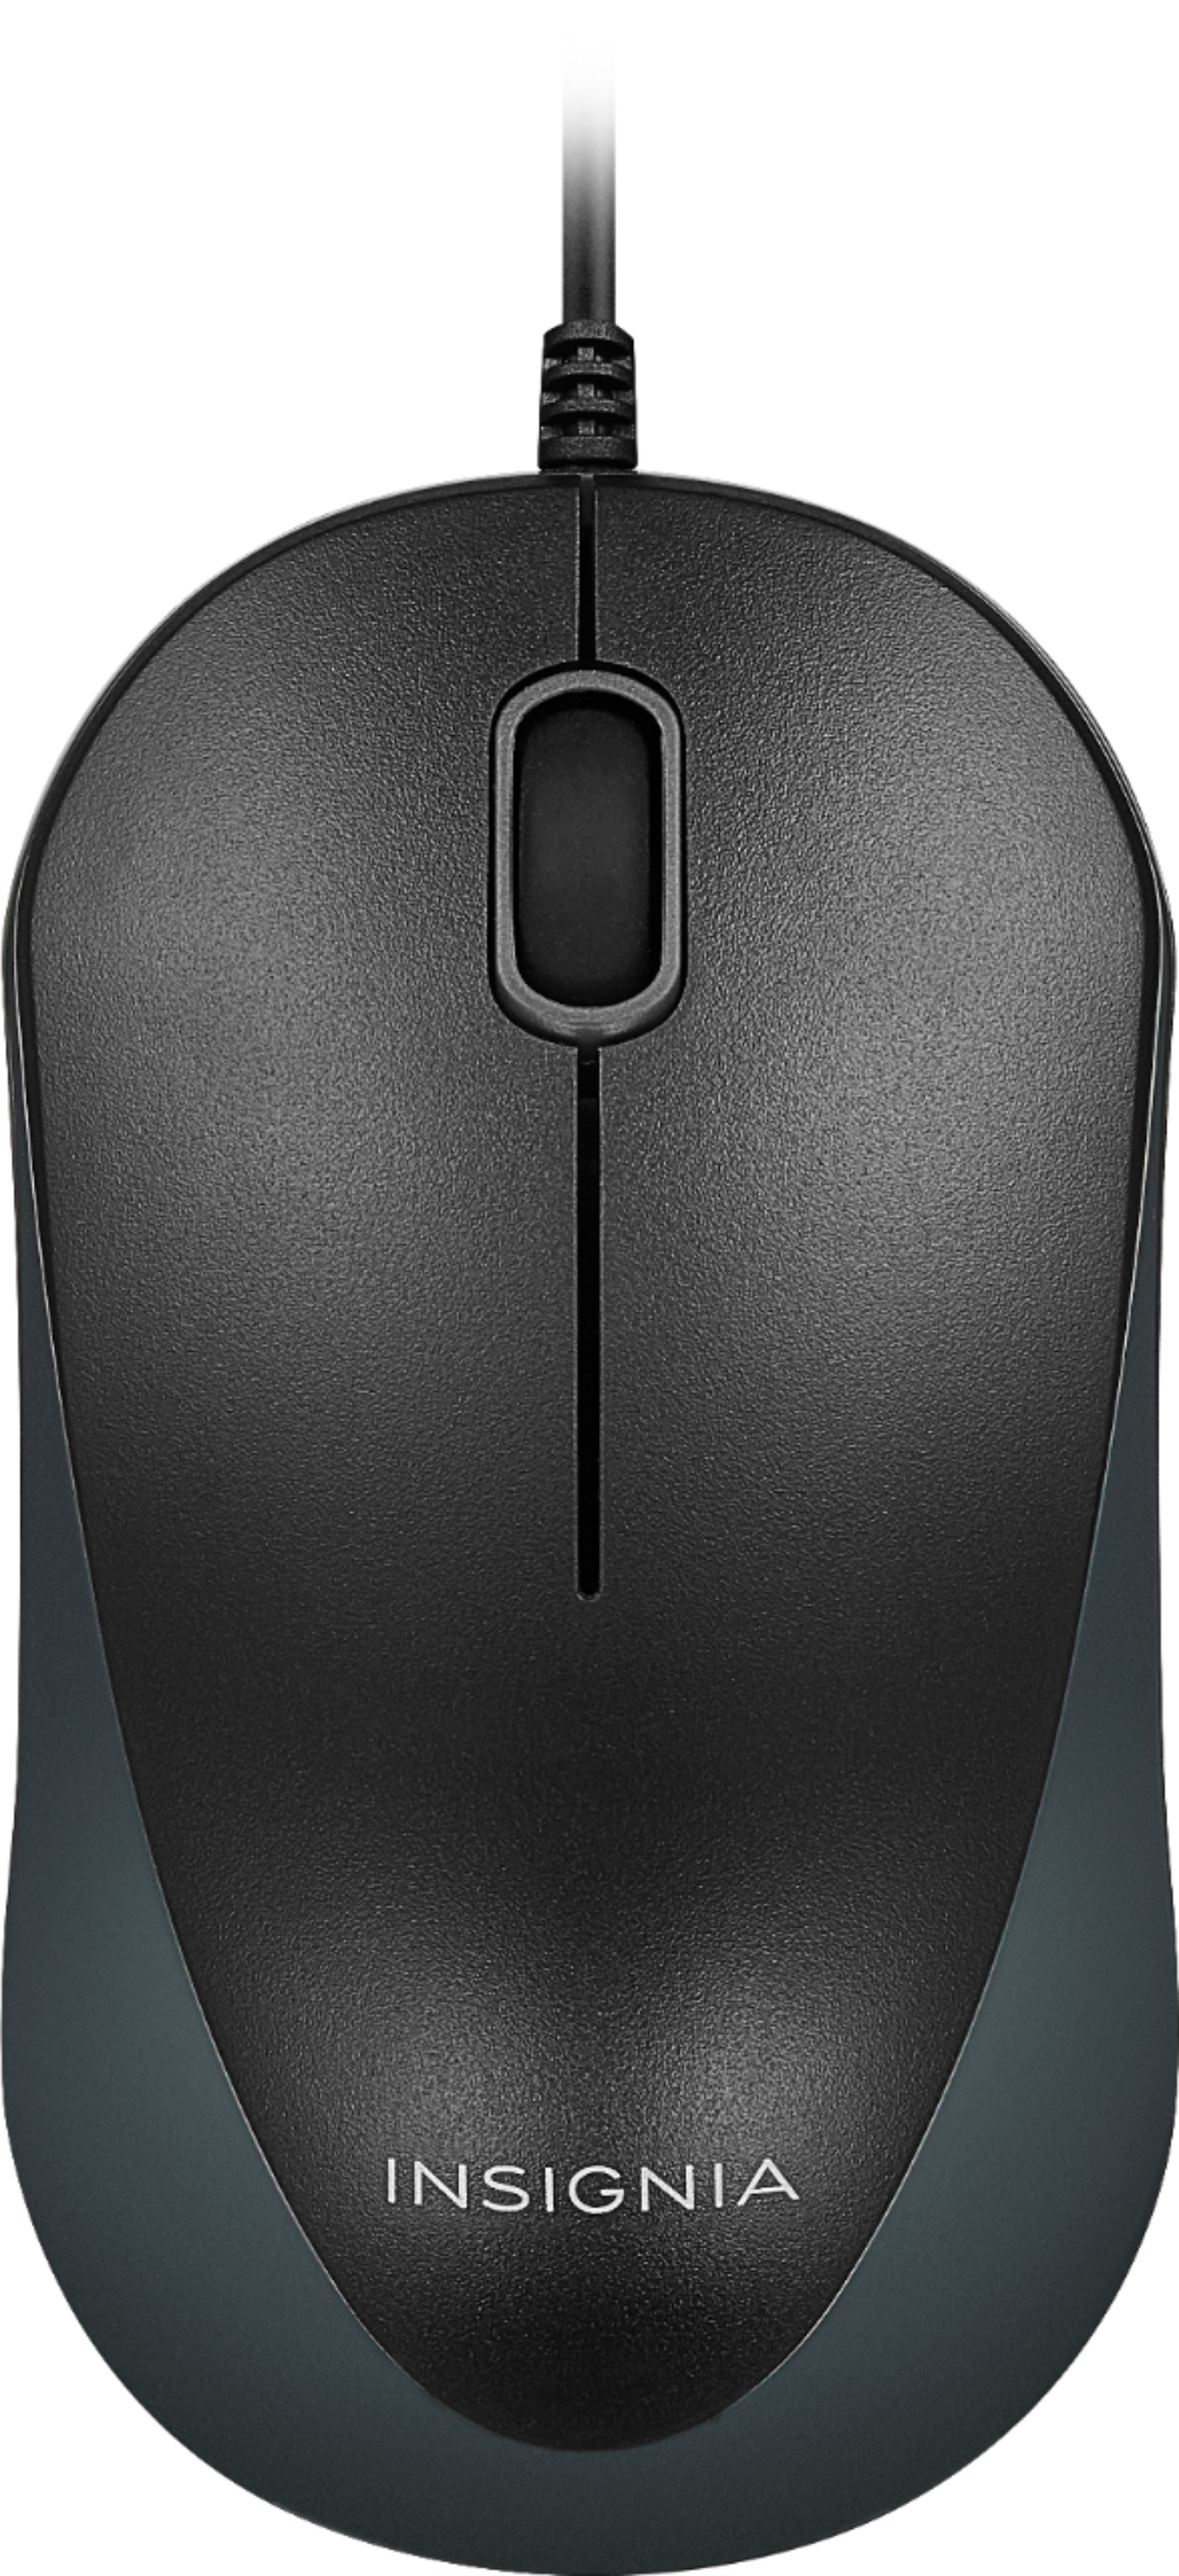 Customer Reviews Insignia™ Wired Optical Mouse Black Ns Pnmw319 Best Buy